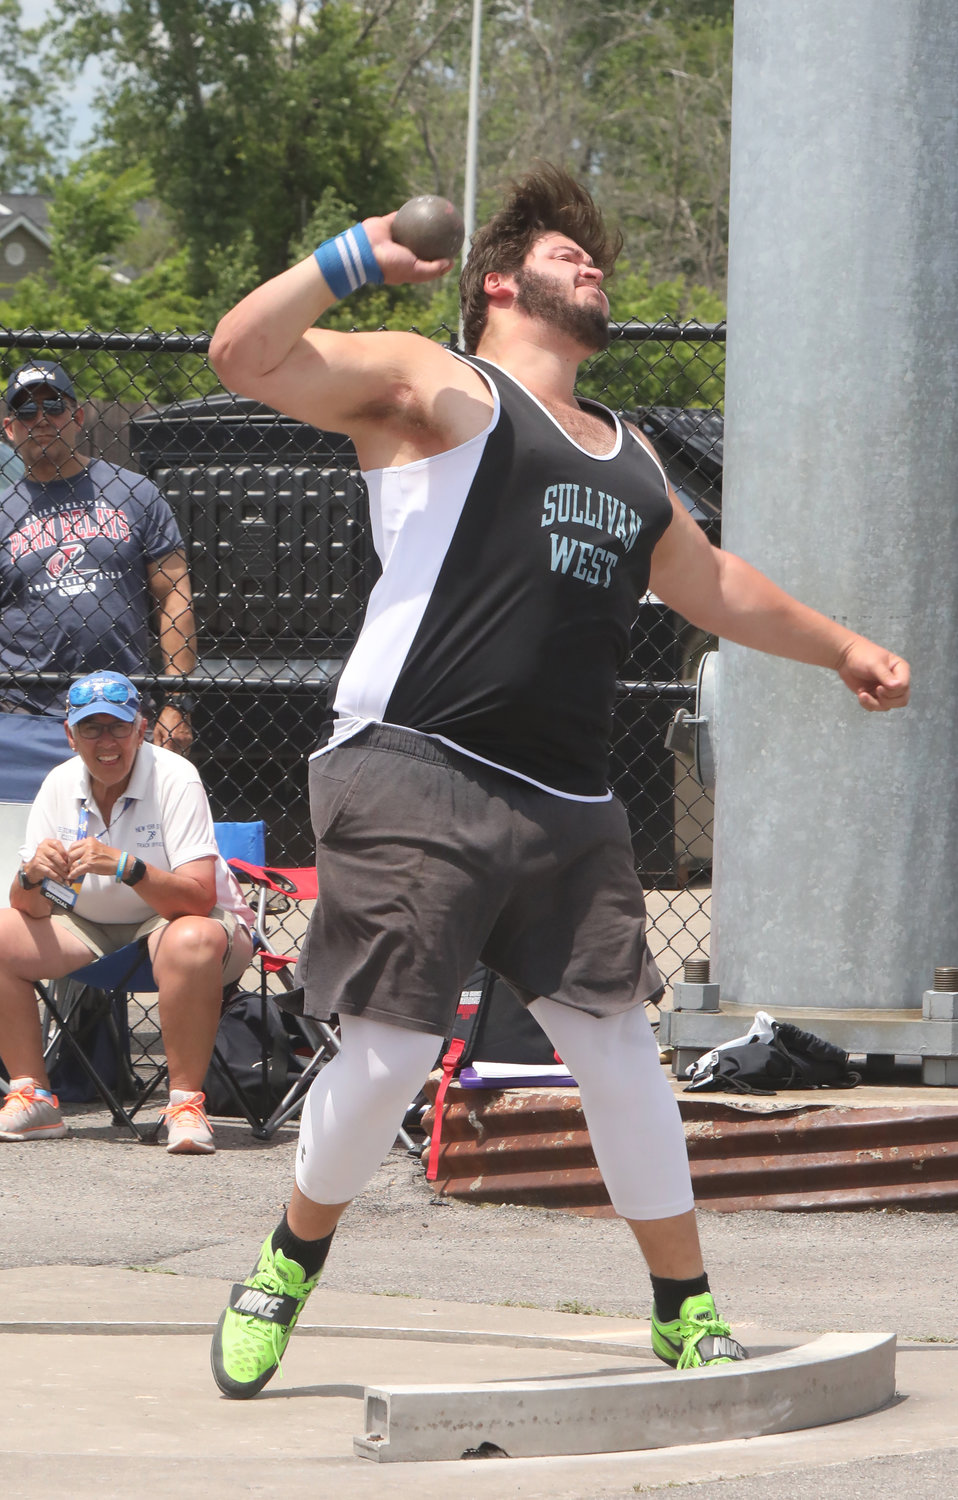 Chris Campanelli finishes third in NYS at the Federation Championships with his lifetime best throw of 53-4.75 in the shot put. It was a perfect way to end his glorious high school career, setting a new school record that is bound to be very longstanding.